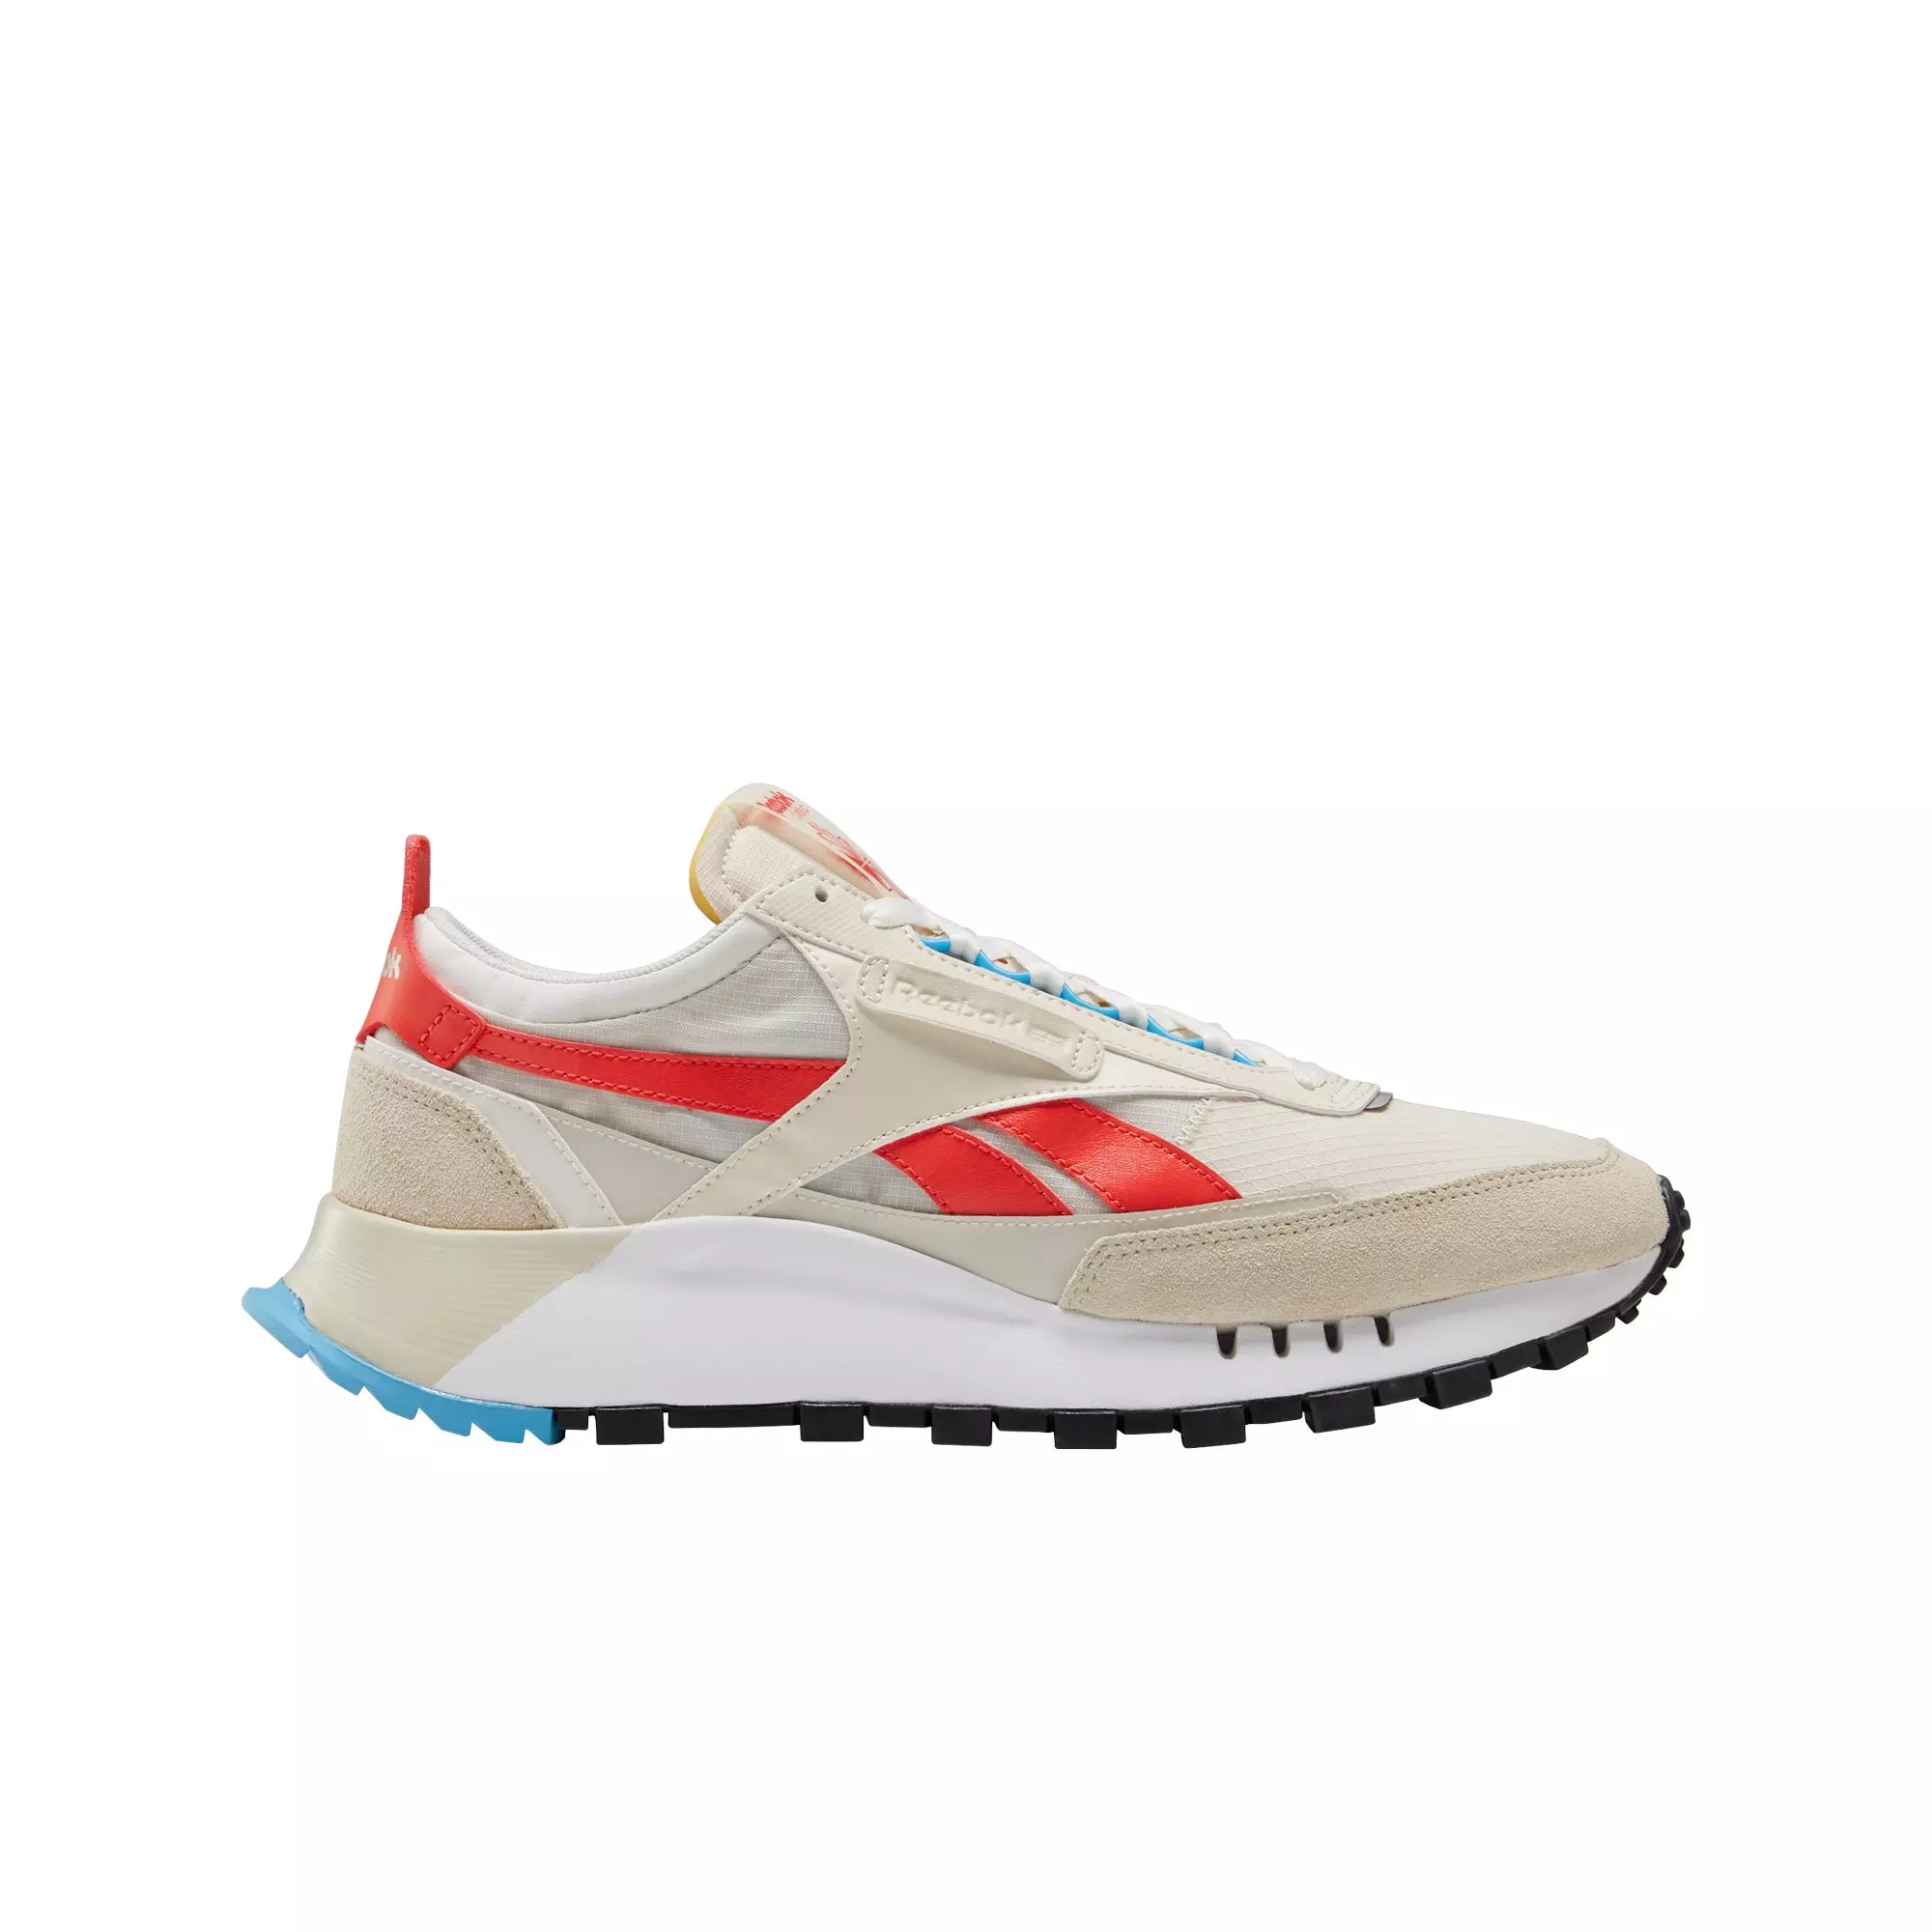 Reebok Cl Legacy Collection. Discover the latest drops. Lifestyle Snaekers, Offers, Stock